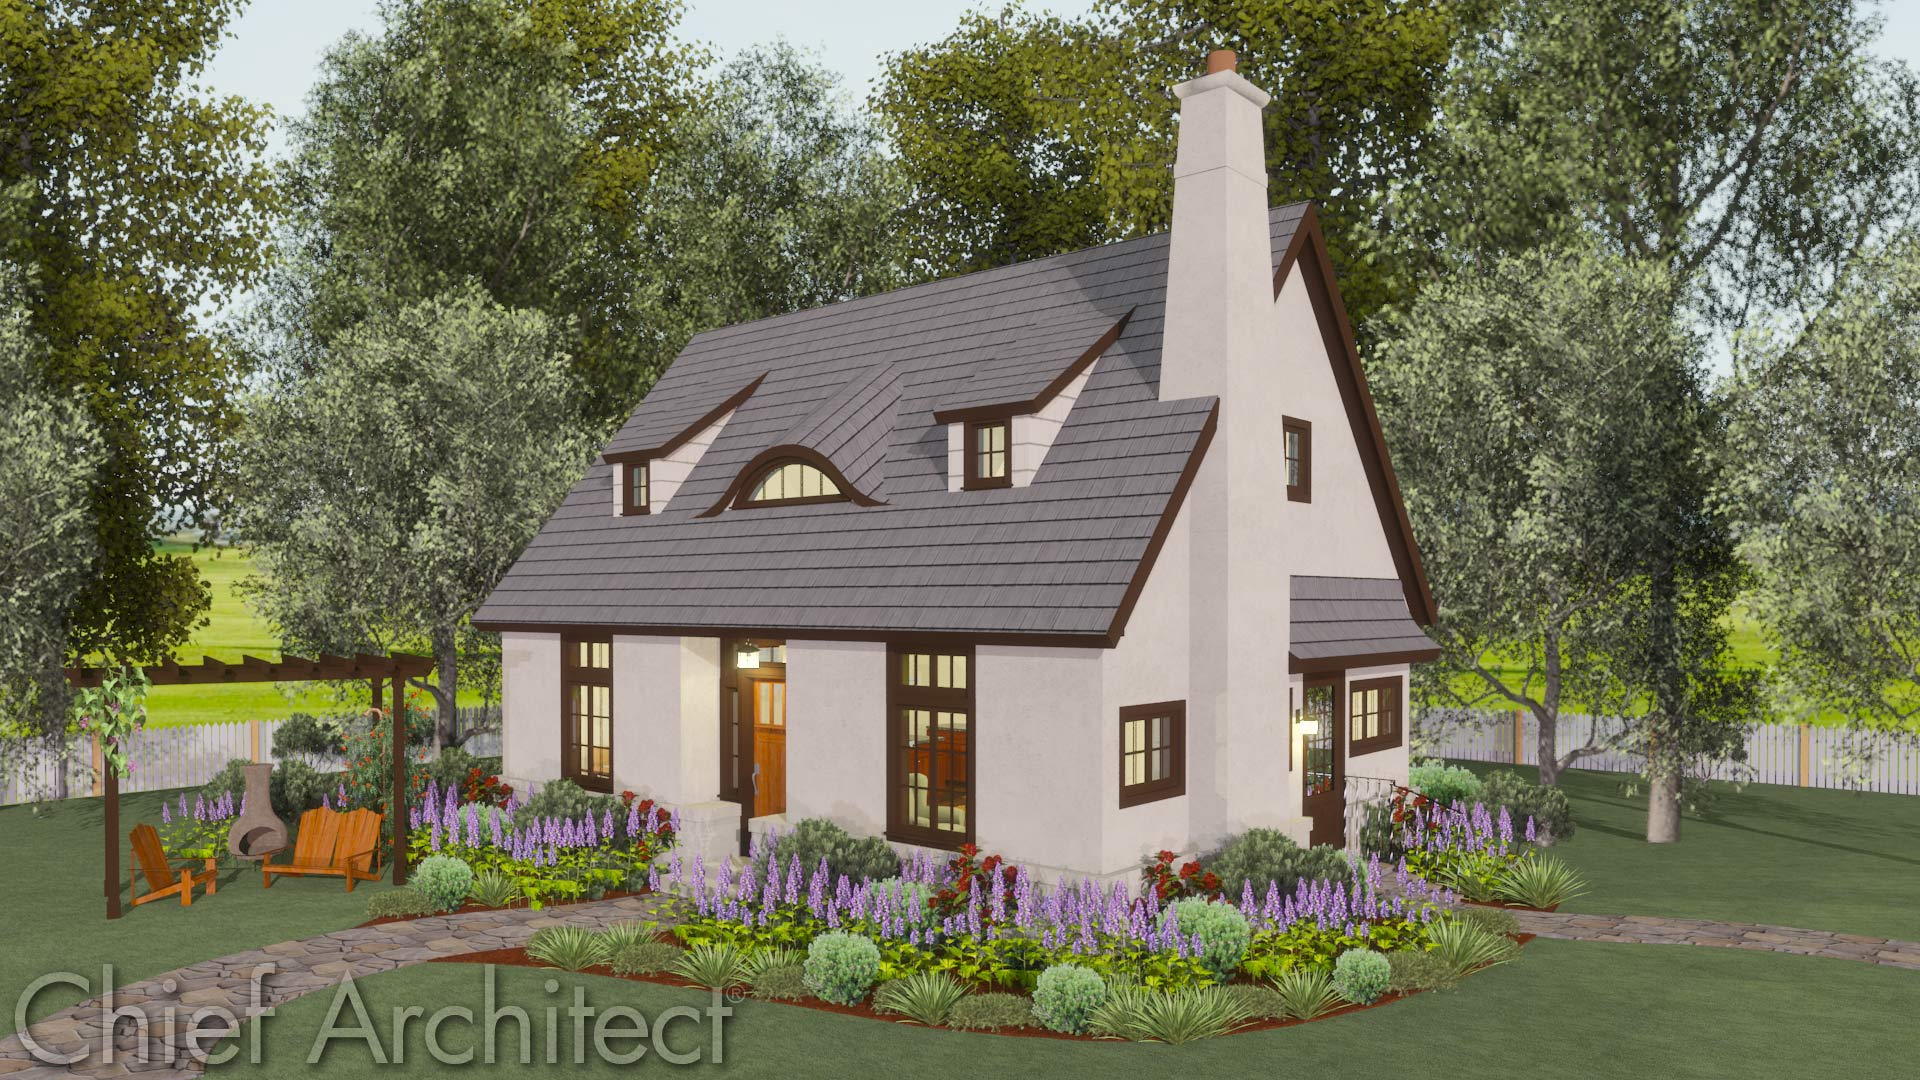 Chief Architect Home Design Software - Samples Gallery